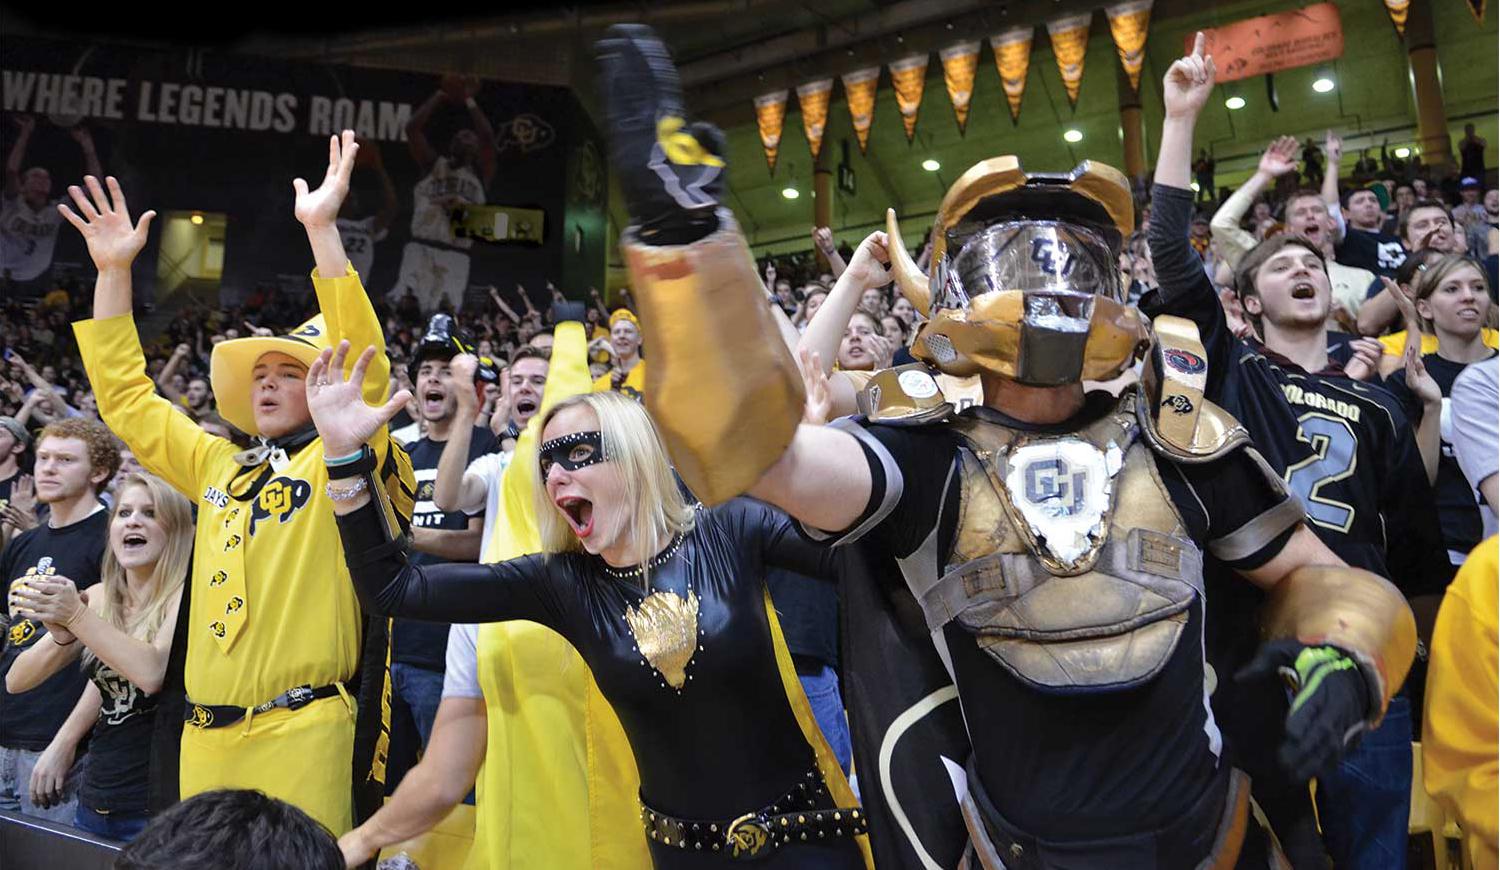 ick Shearon, known as “Buff Man,” and “Buff Girl” Courtney Benejam cheer on the Buffs